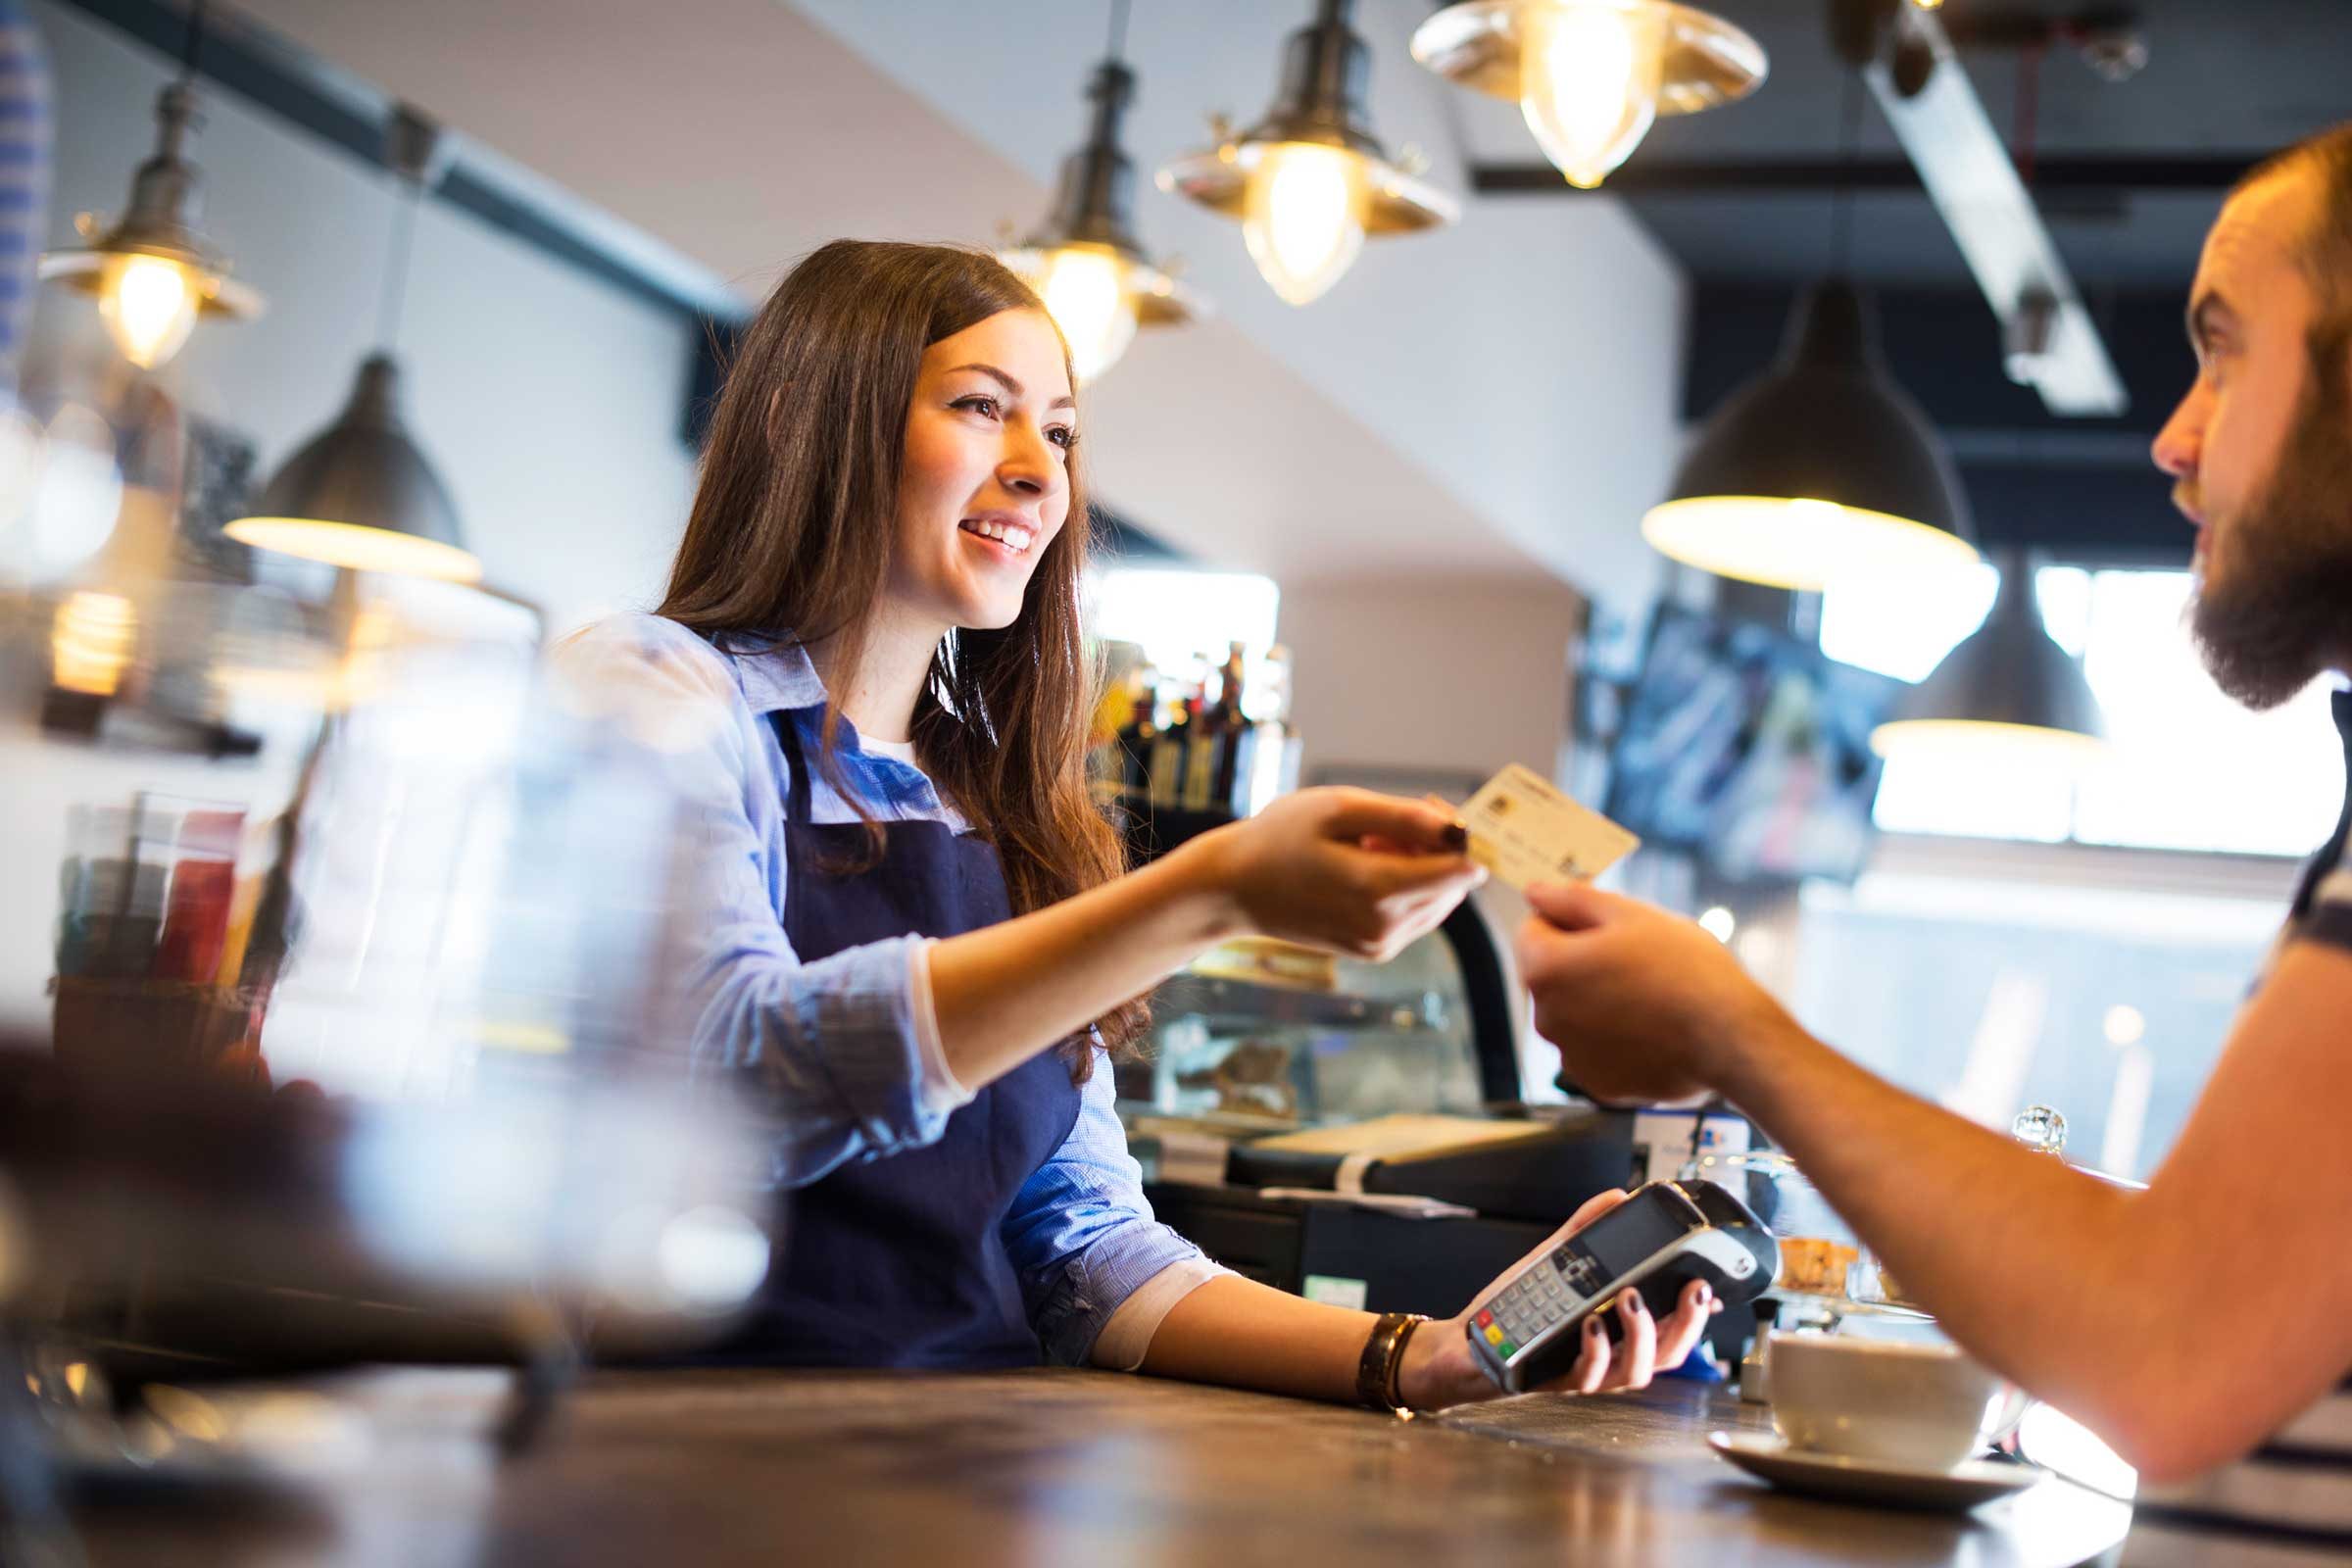 Coffee Shop Etiquette: Rules to Follow | Reader's Digest